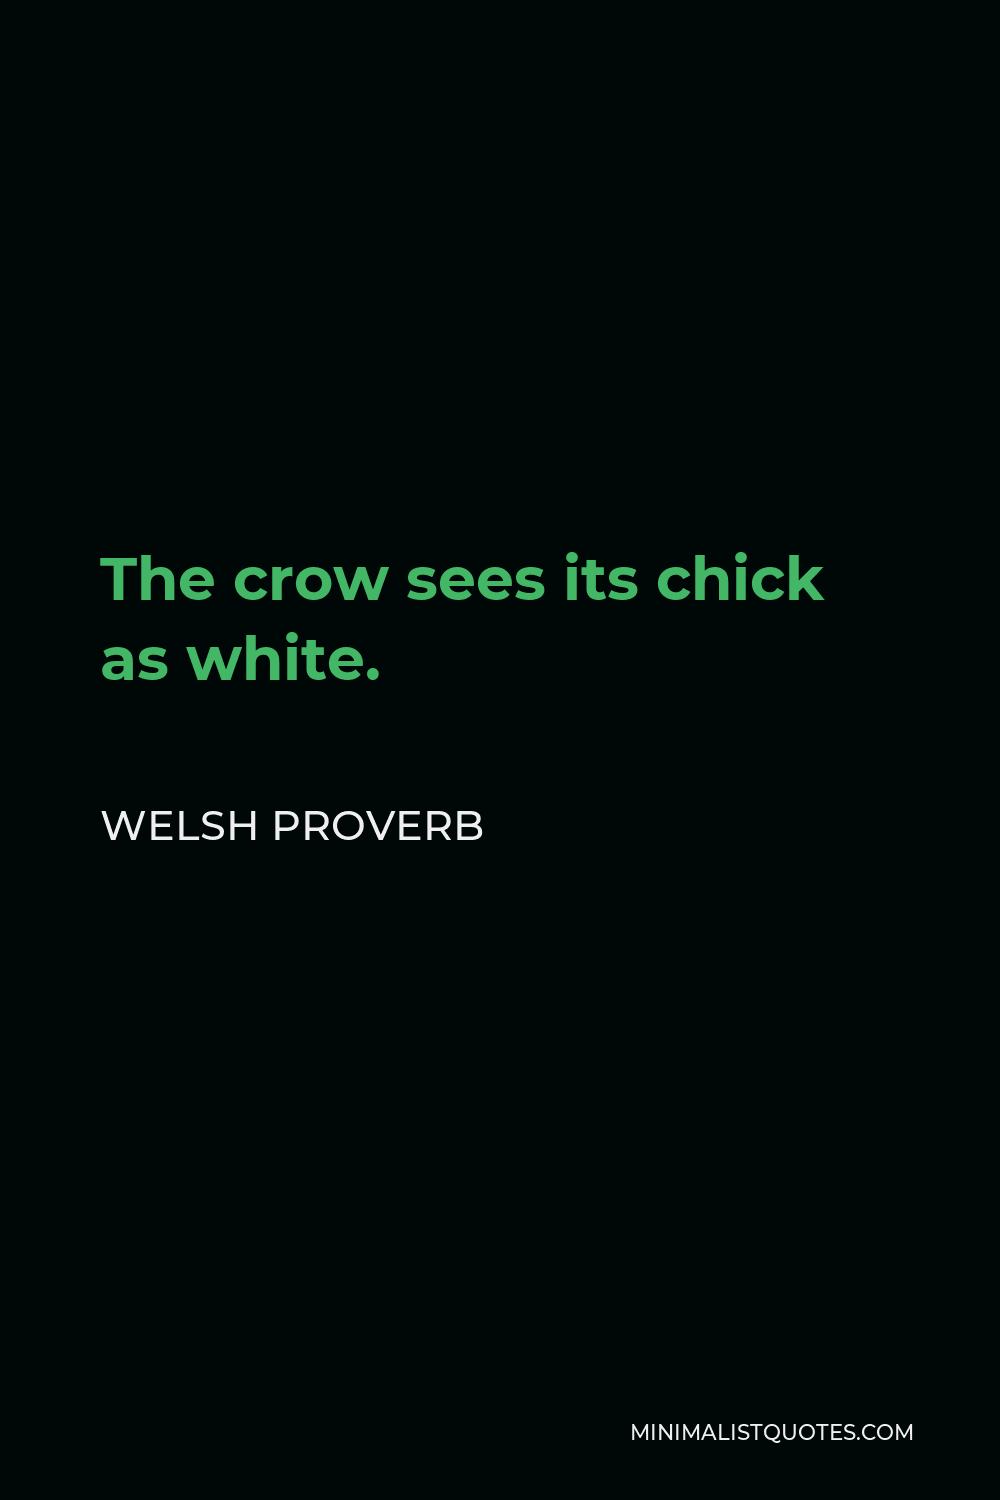 Welsh Proverb Quote - The crow sees its chick as white.